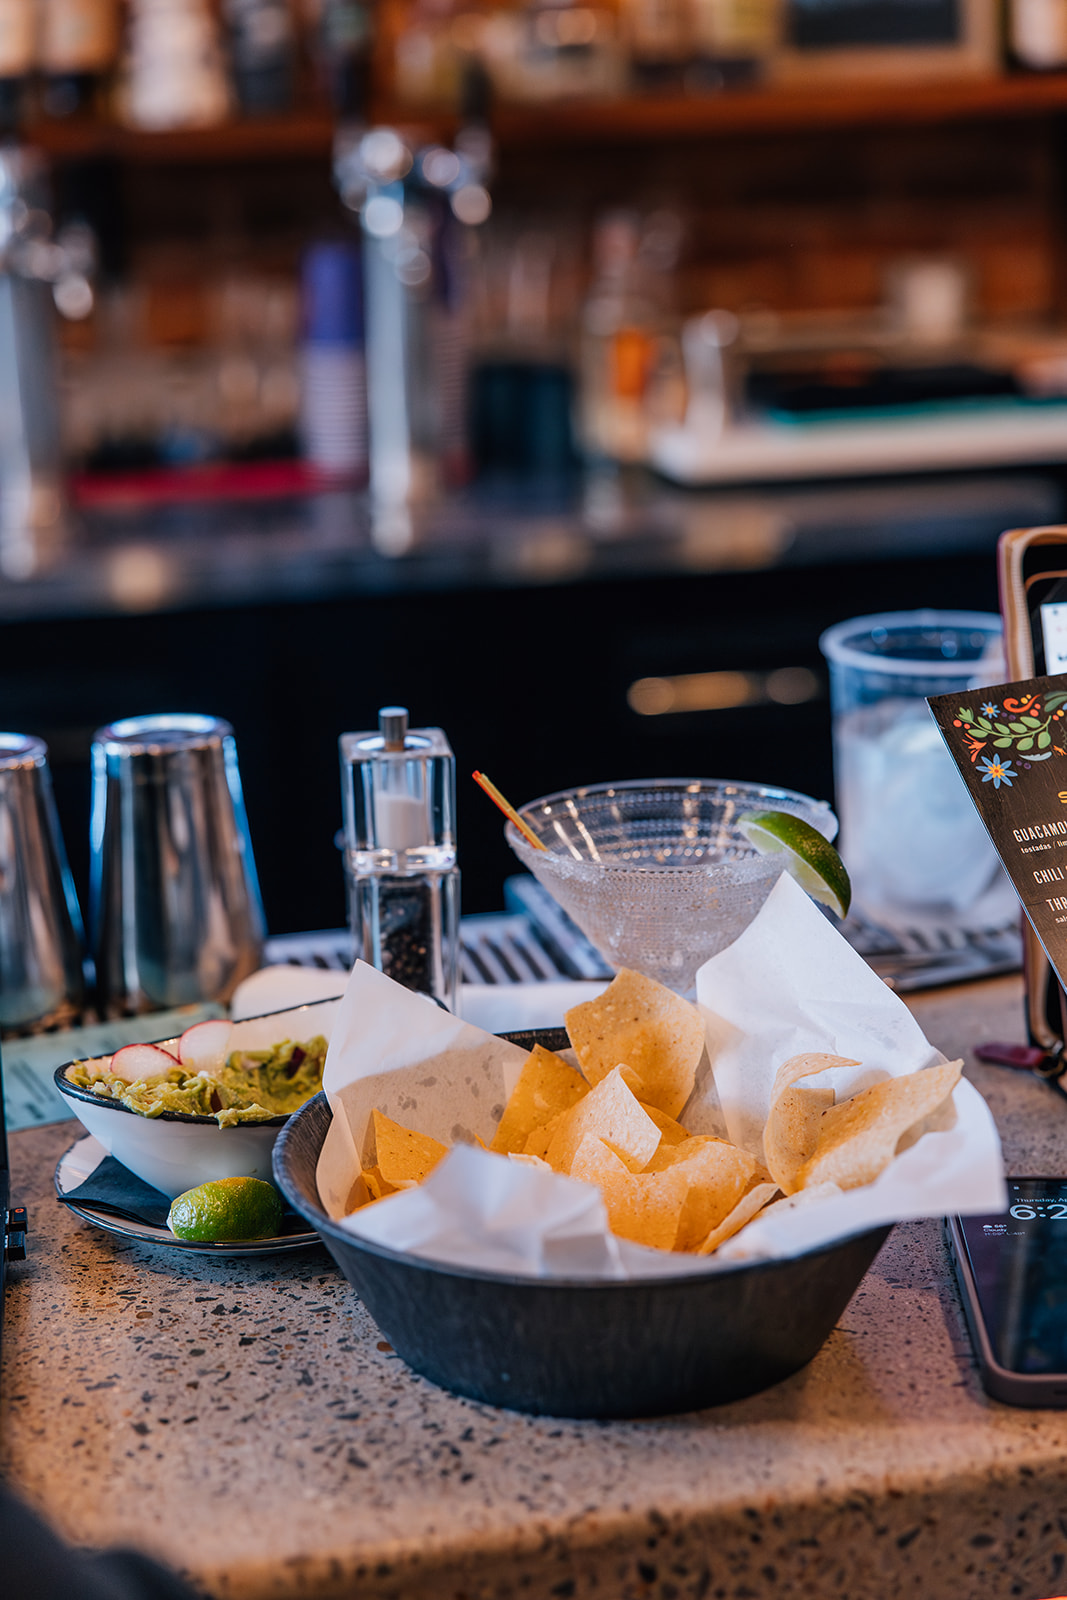 Del Chuco chips and guac on the bar